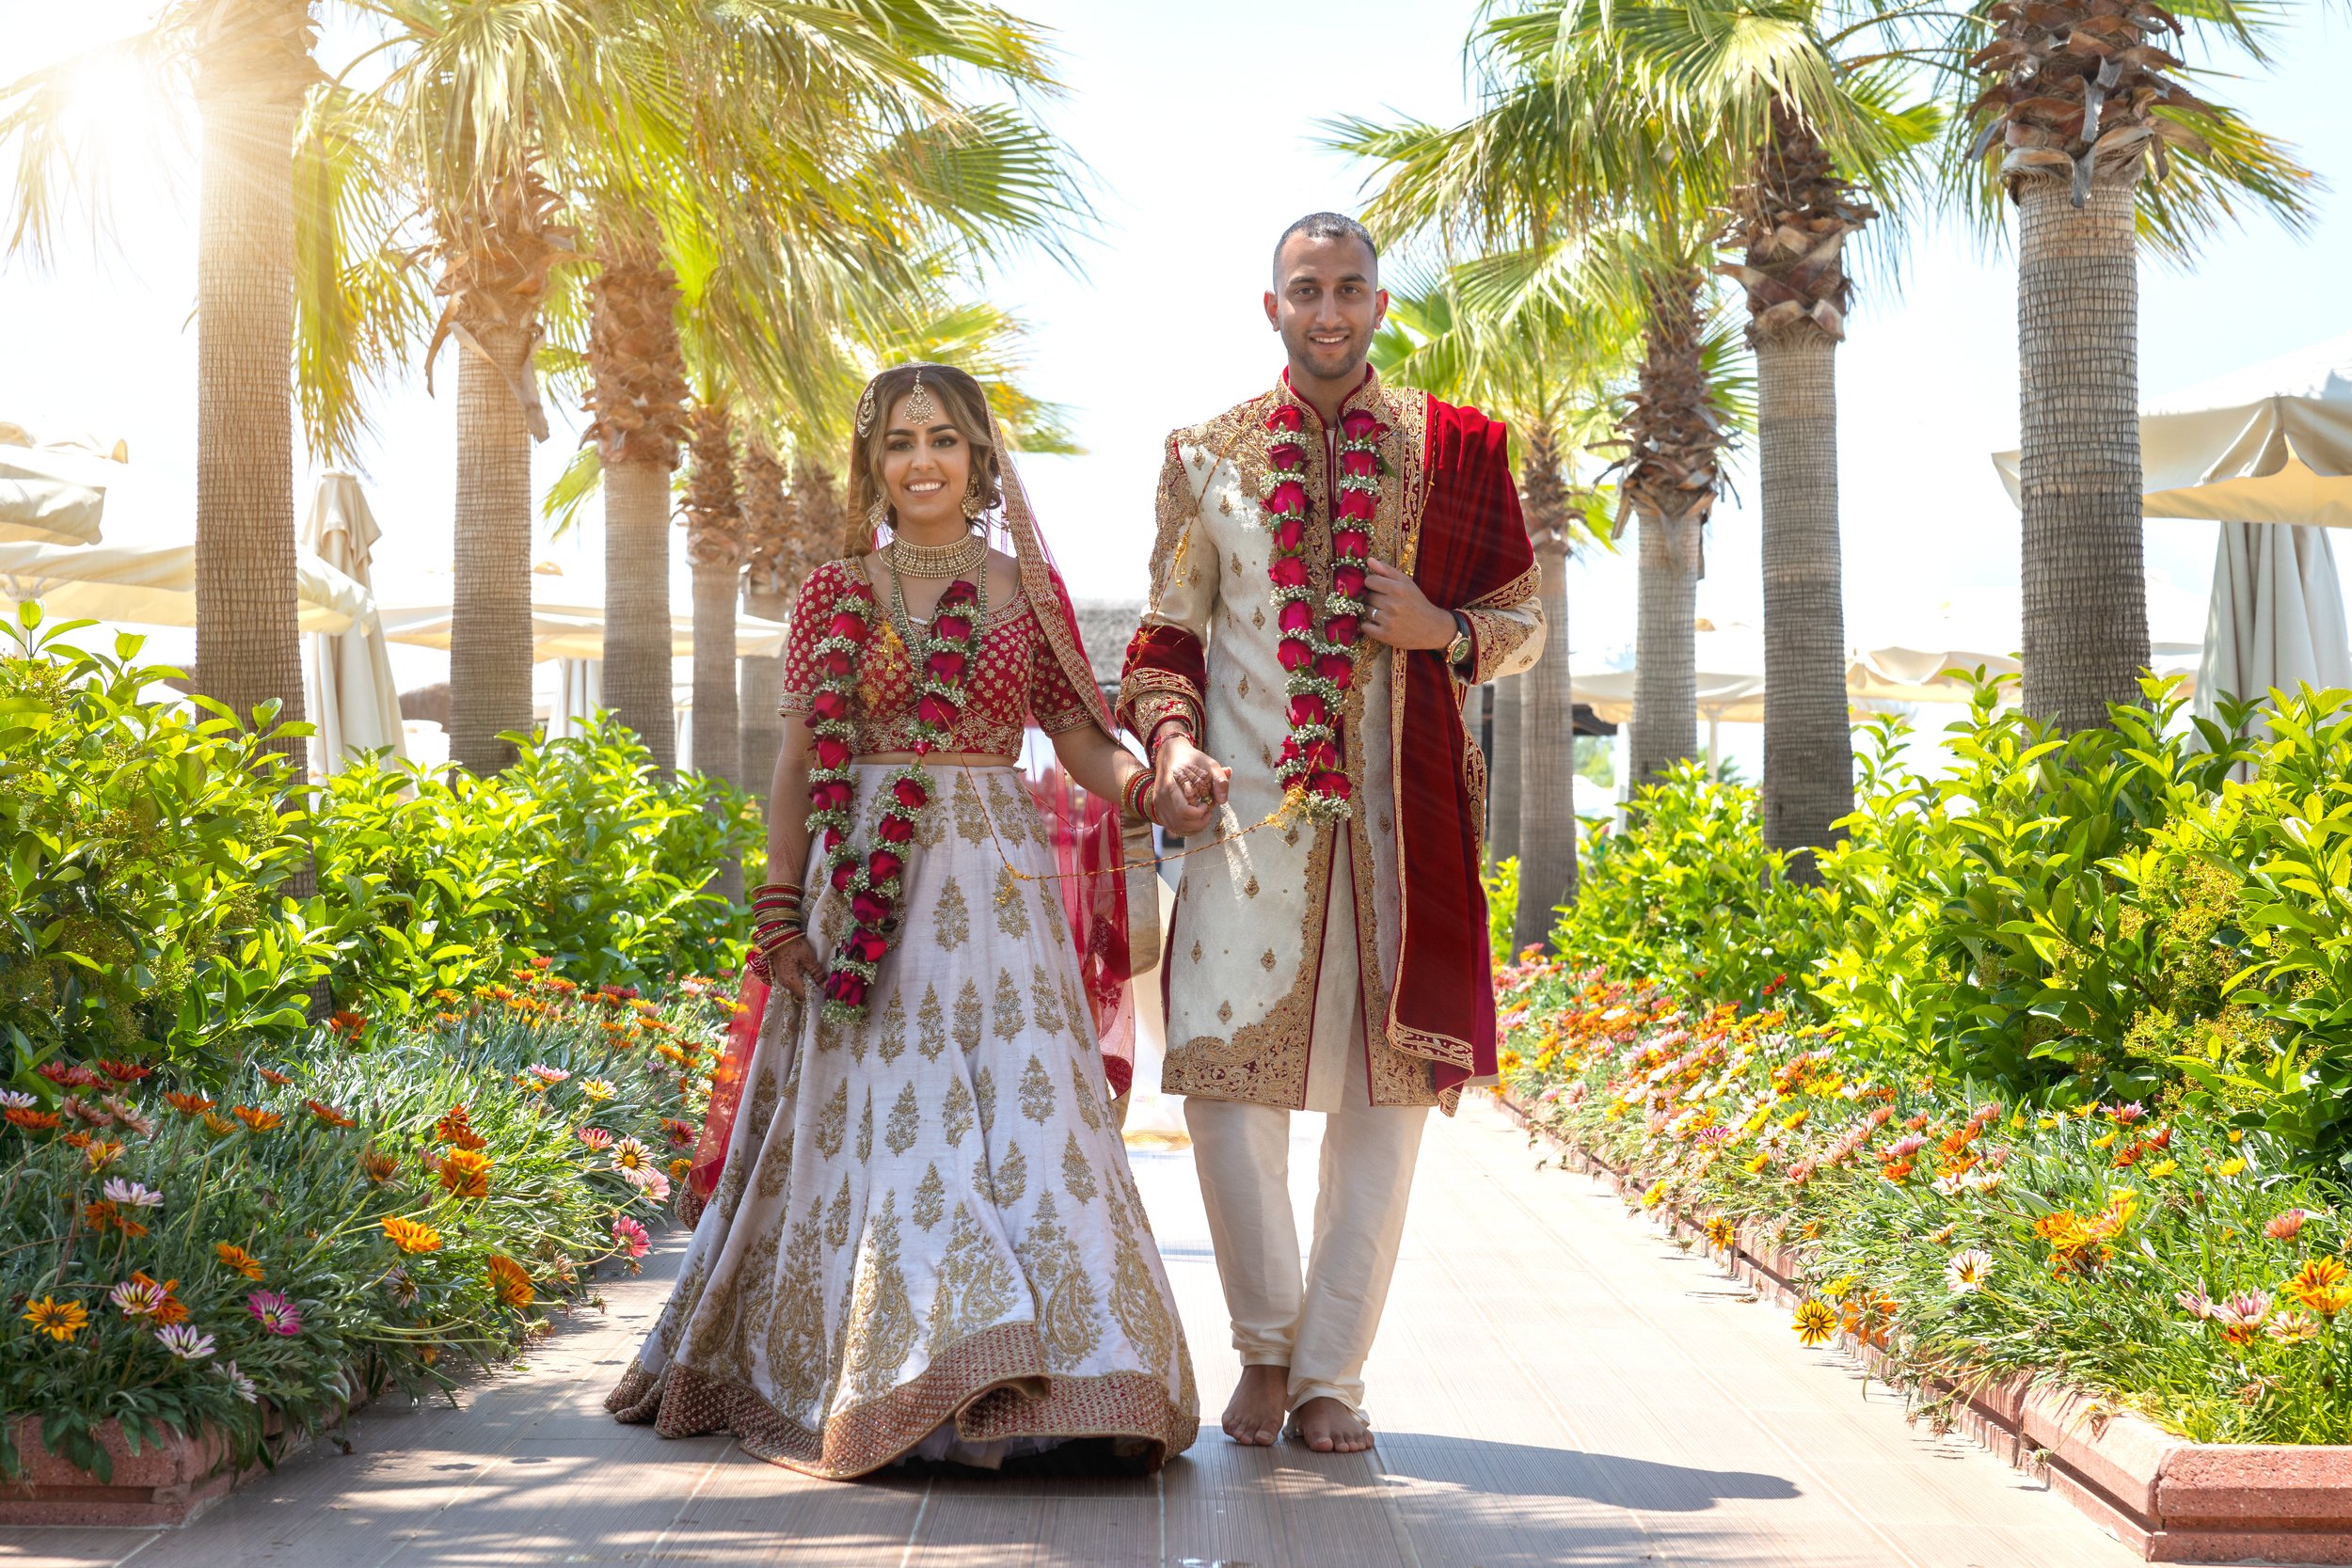 A bride and groom portrait taken at their wedding in Turkey, wearing tradition Indian wedding outfits. The couple are walking down a path surrounded by palm trees.